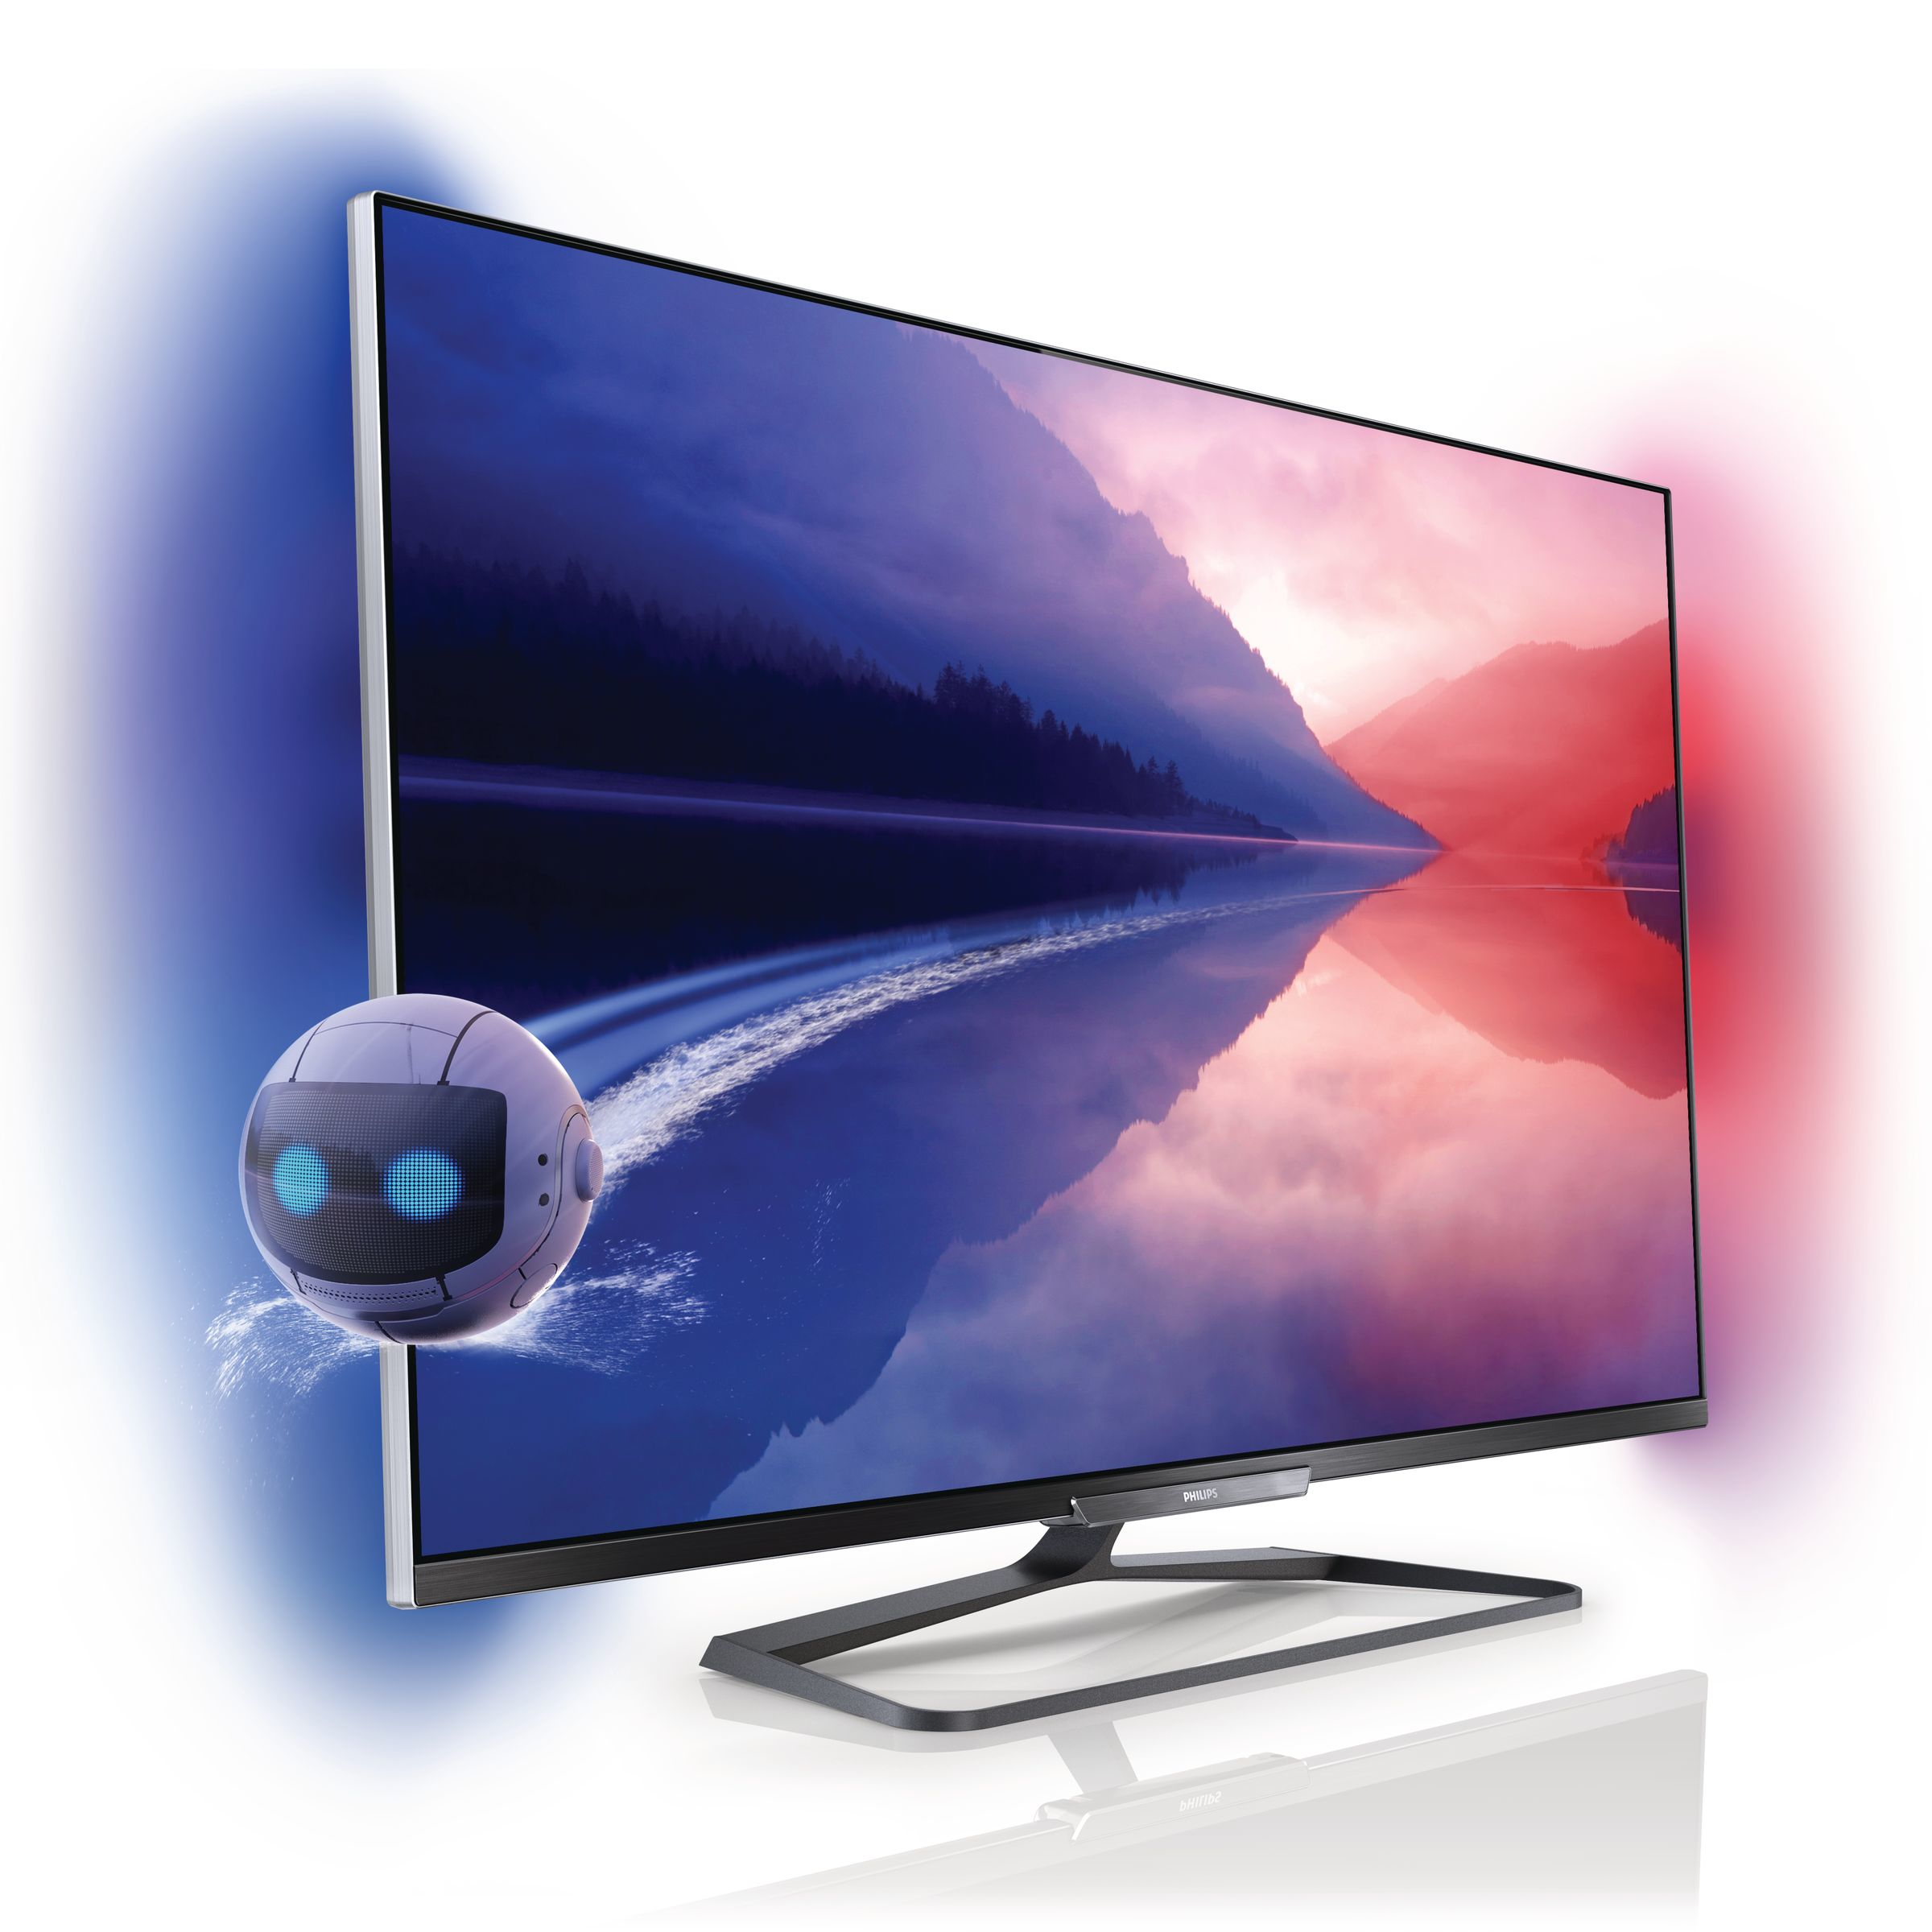 Autonomy I have an English class profound Philips 6000 series 3D Smart LED TV 47PFL6008K/12